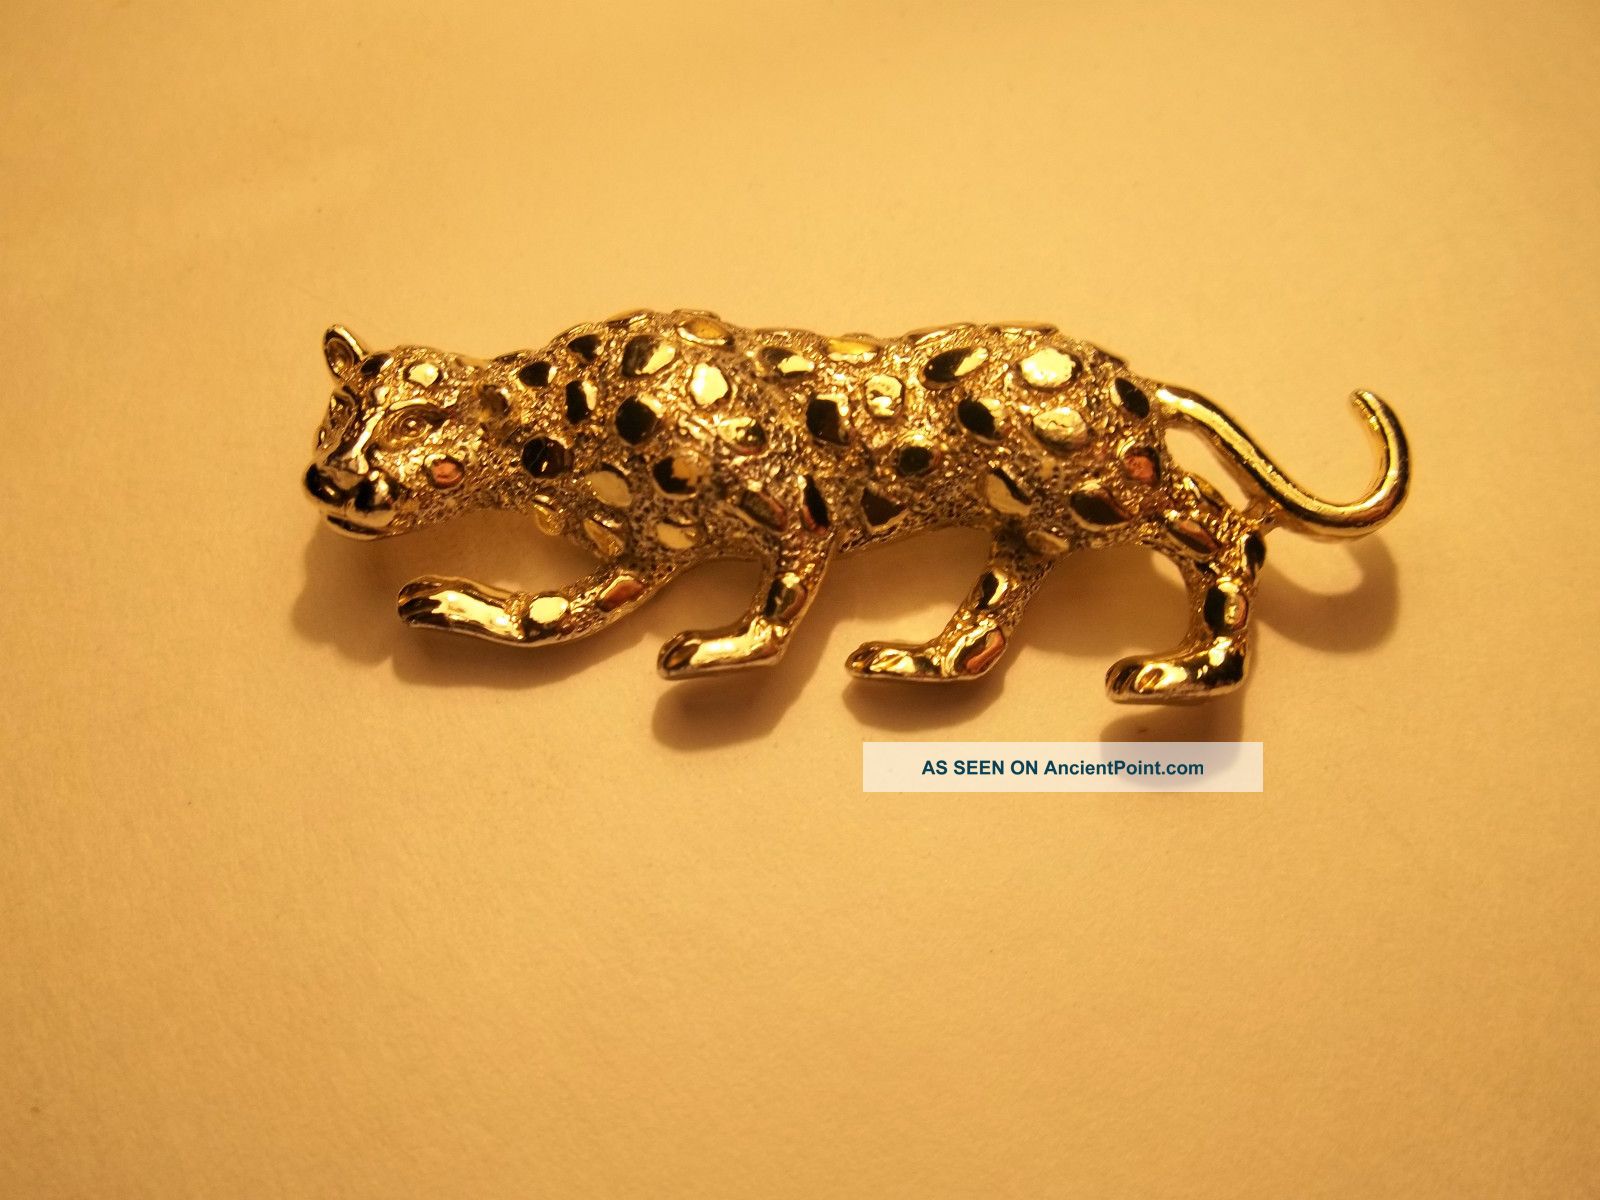  - vintage_jewelry_leopard_brooch_pin_gerrys_wild_life_africa_asia_europe_canada_1_lgw